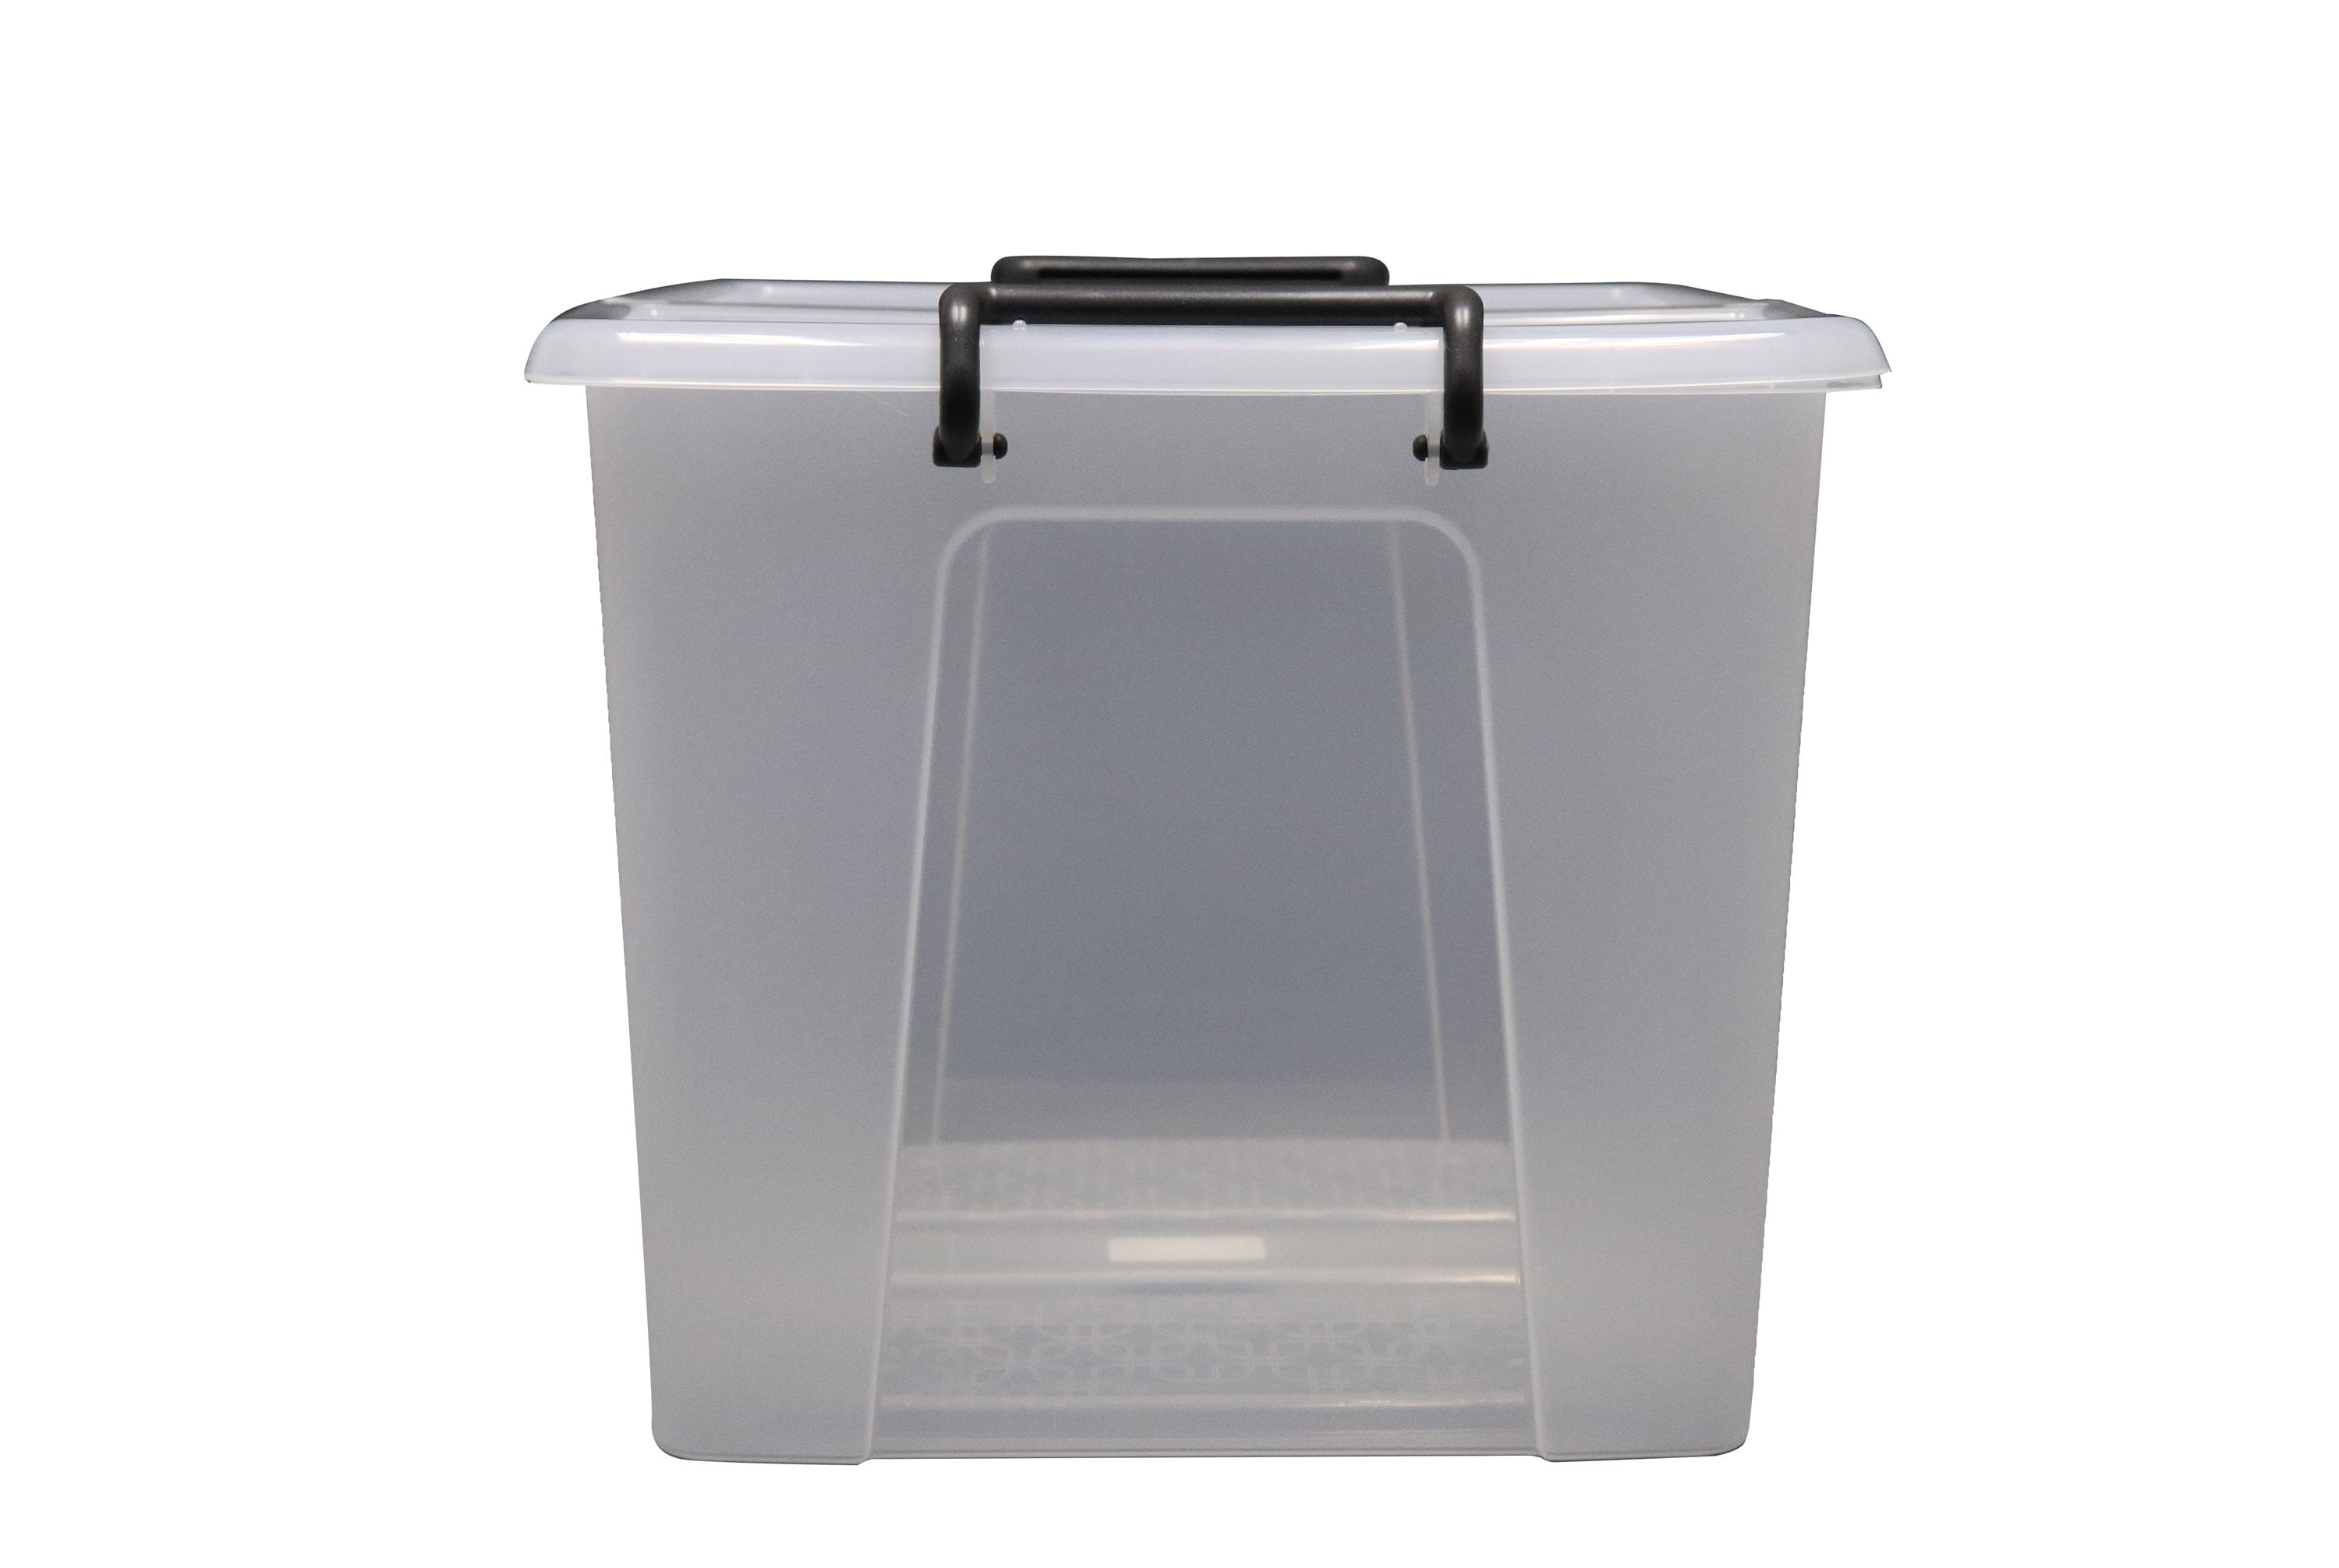 Superio Clear Plastic Storage Bins with Lids, 6.25 Quart (2 Pack),  Stackable Storage Container with Latches and Handles 